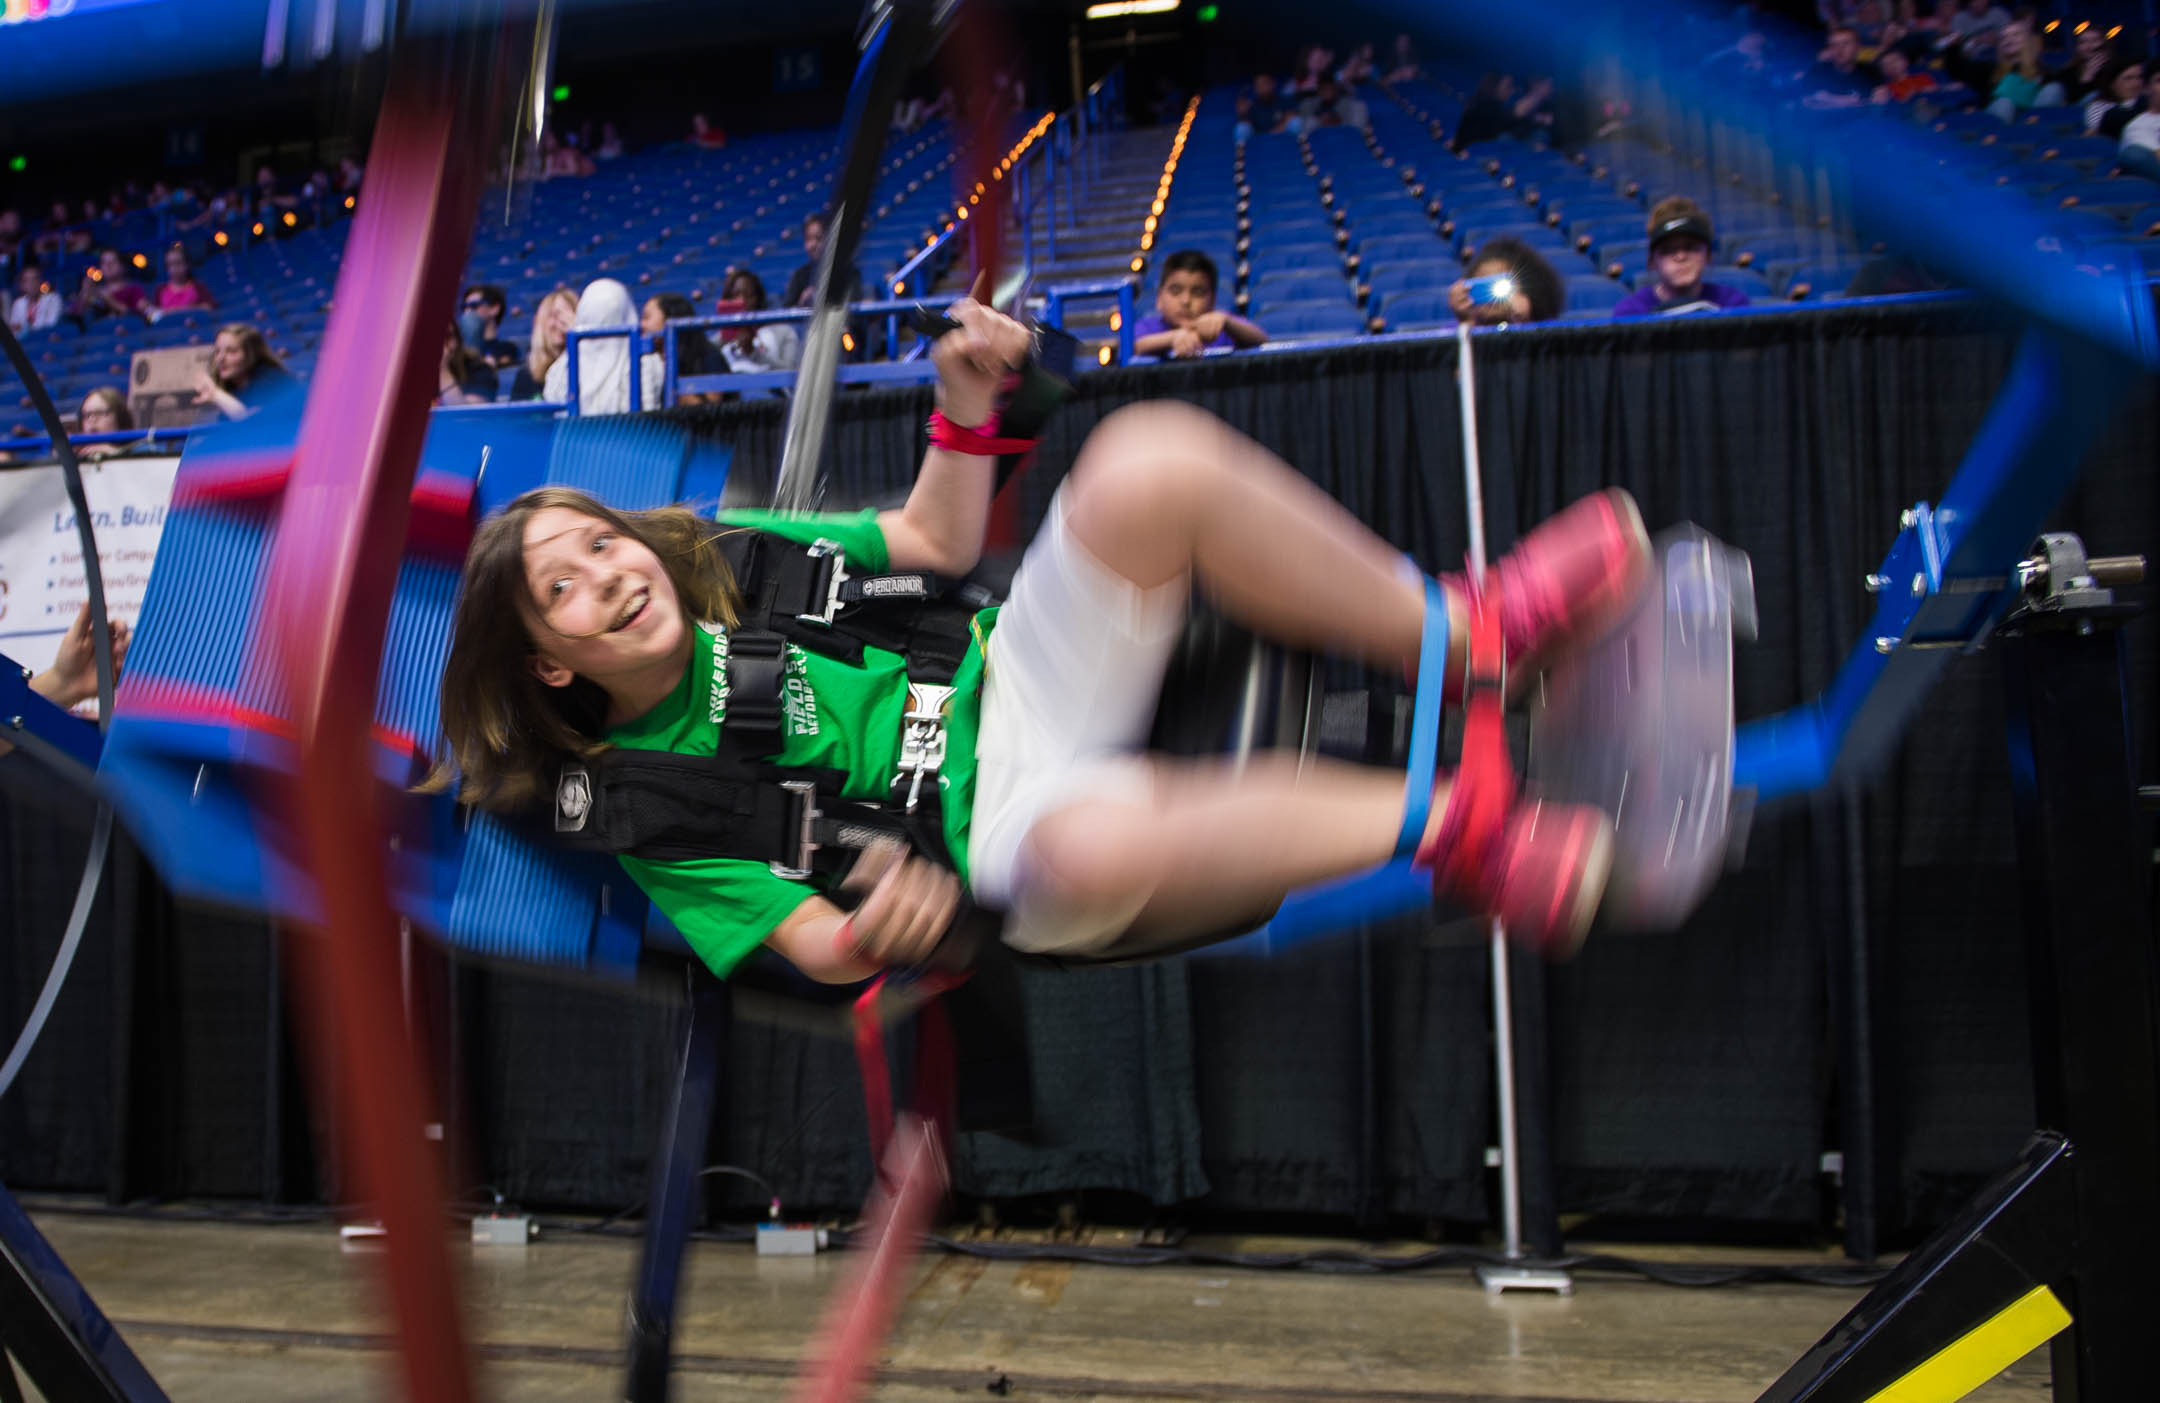 Isabell Hagan, a 5th-grader at Field Elementary School (Jefferson County), rides on a gyroscopic chair at the STLP State Championship. Photo by Bobby Ellis, April 12, 201`7